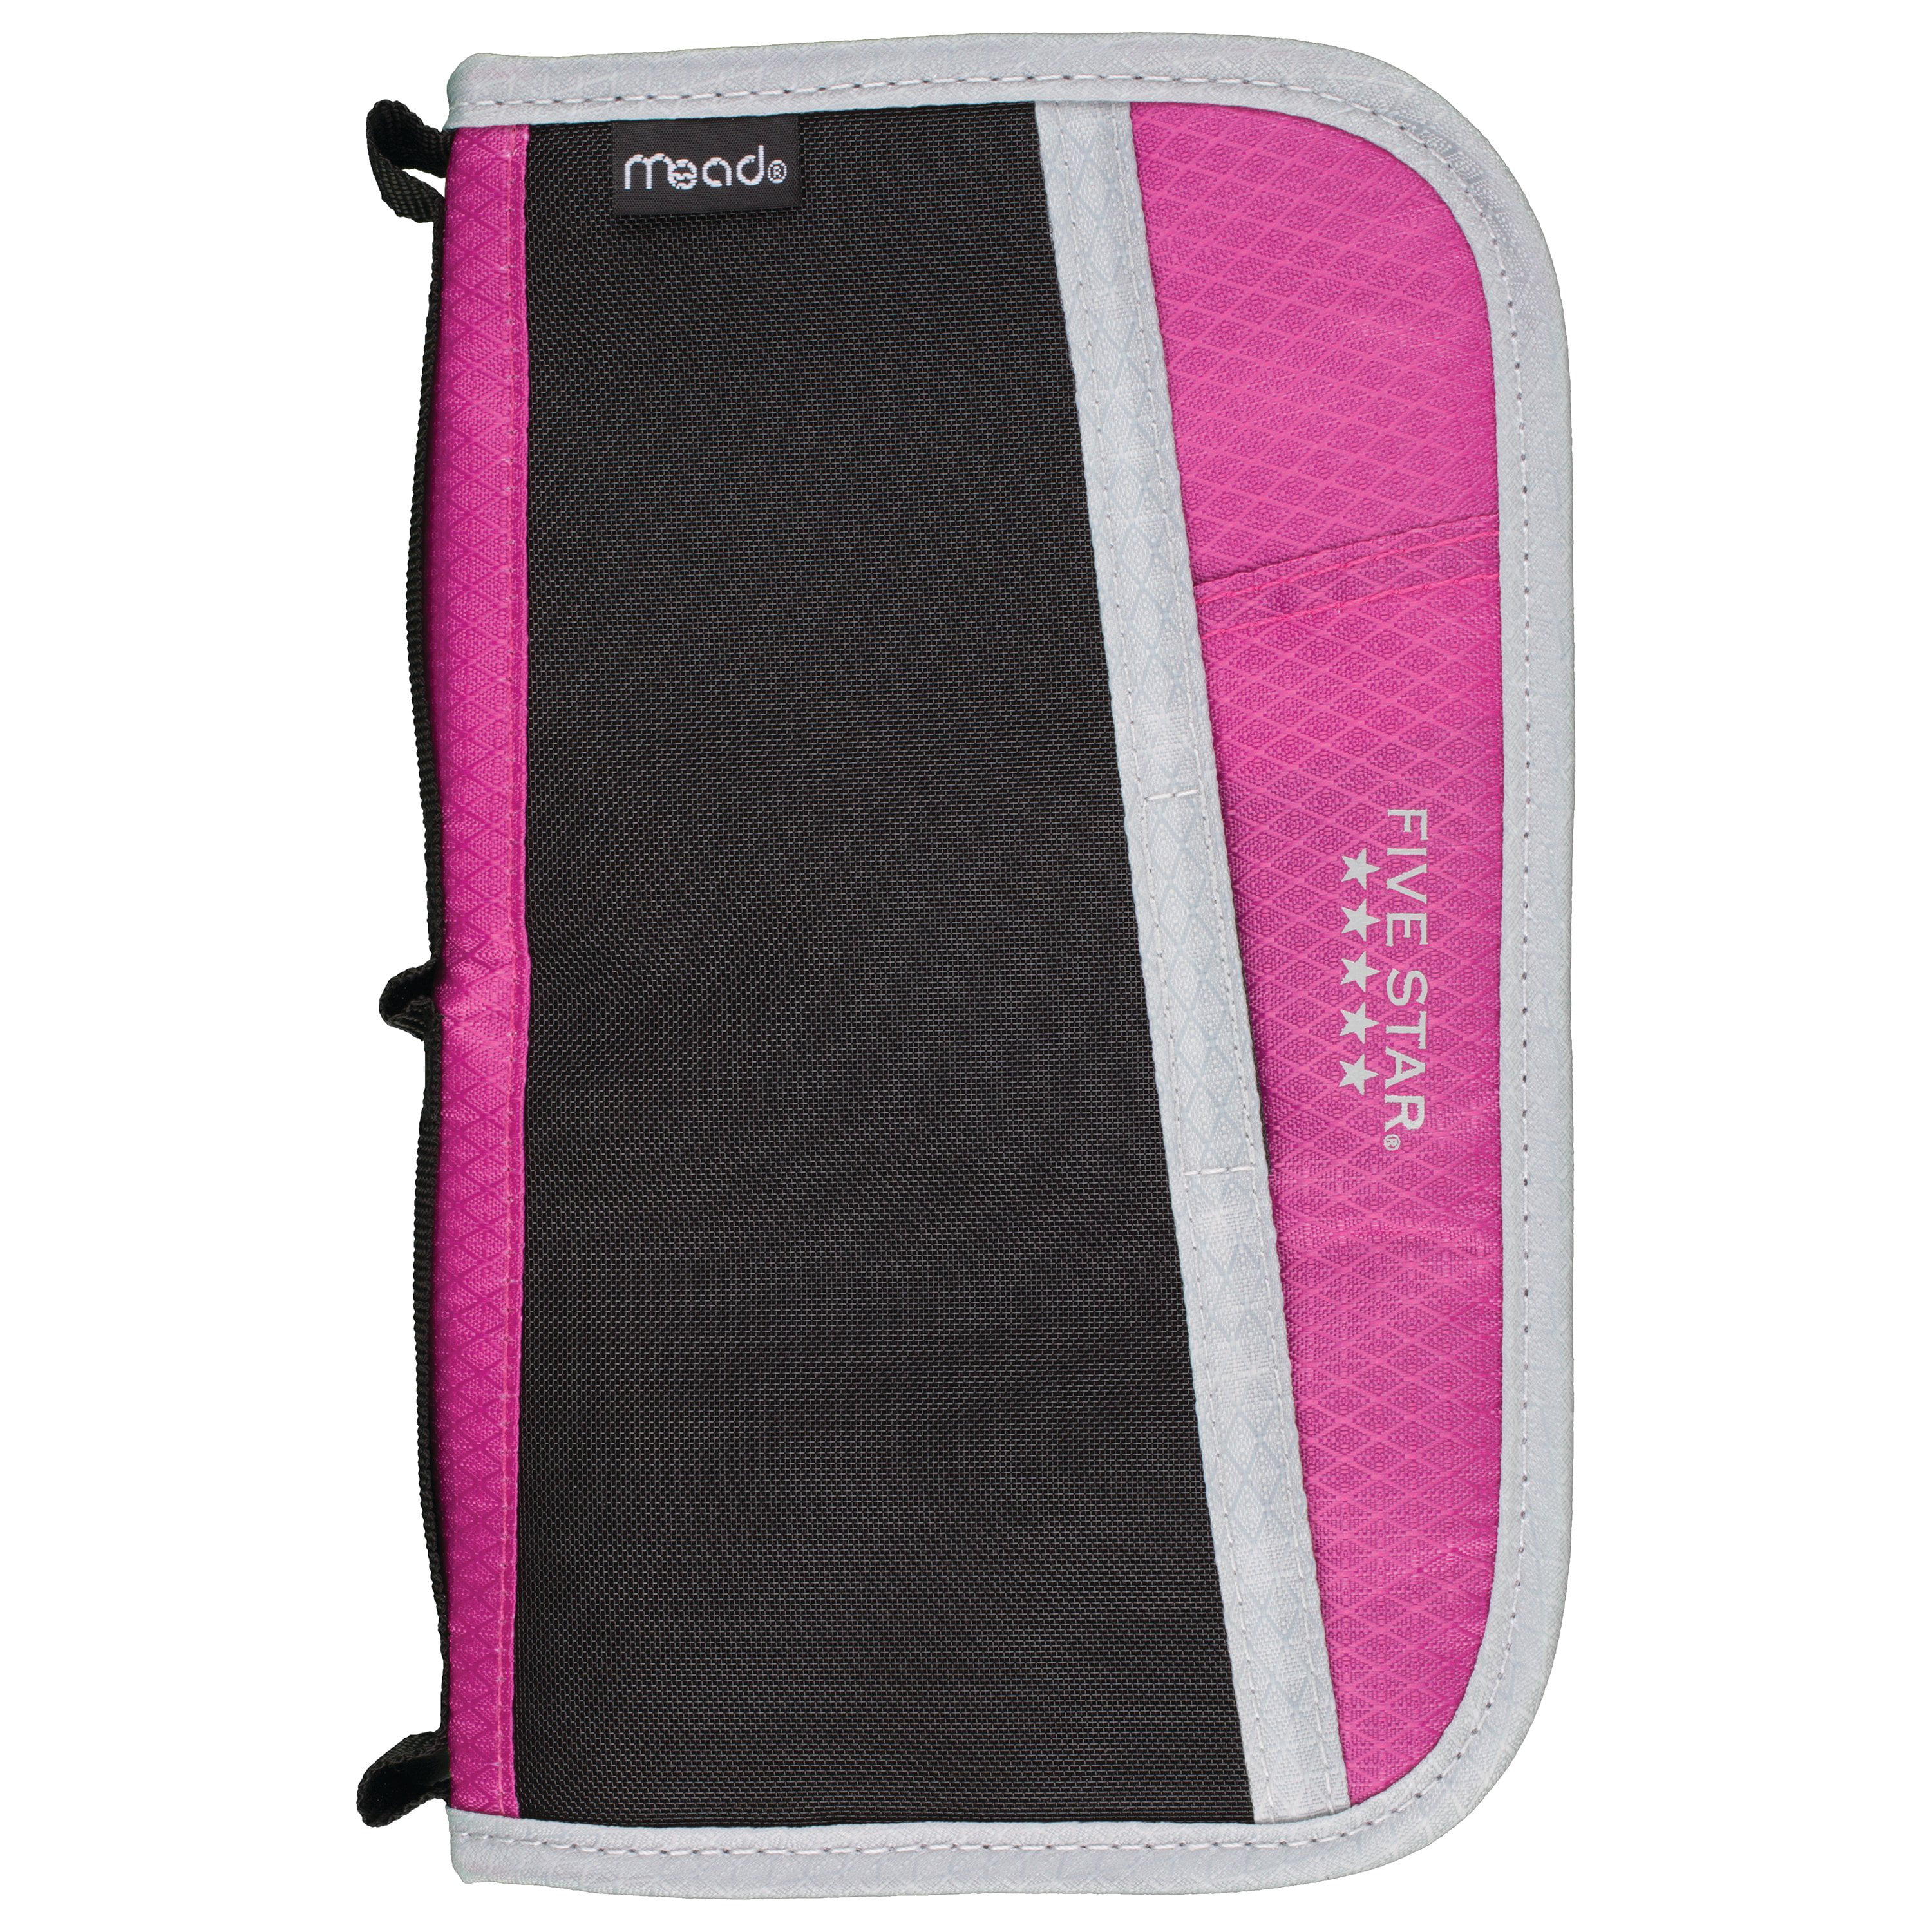  Five Star Zipper Pencil Pouch, Pink (72143) : Office Products